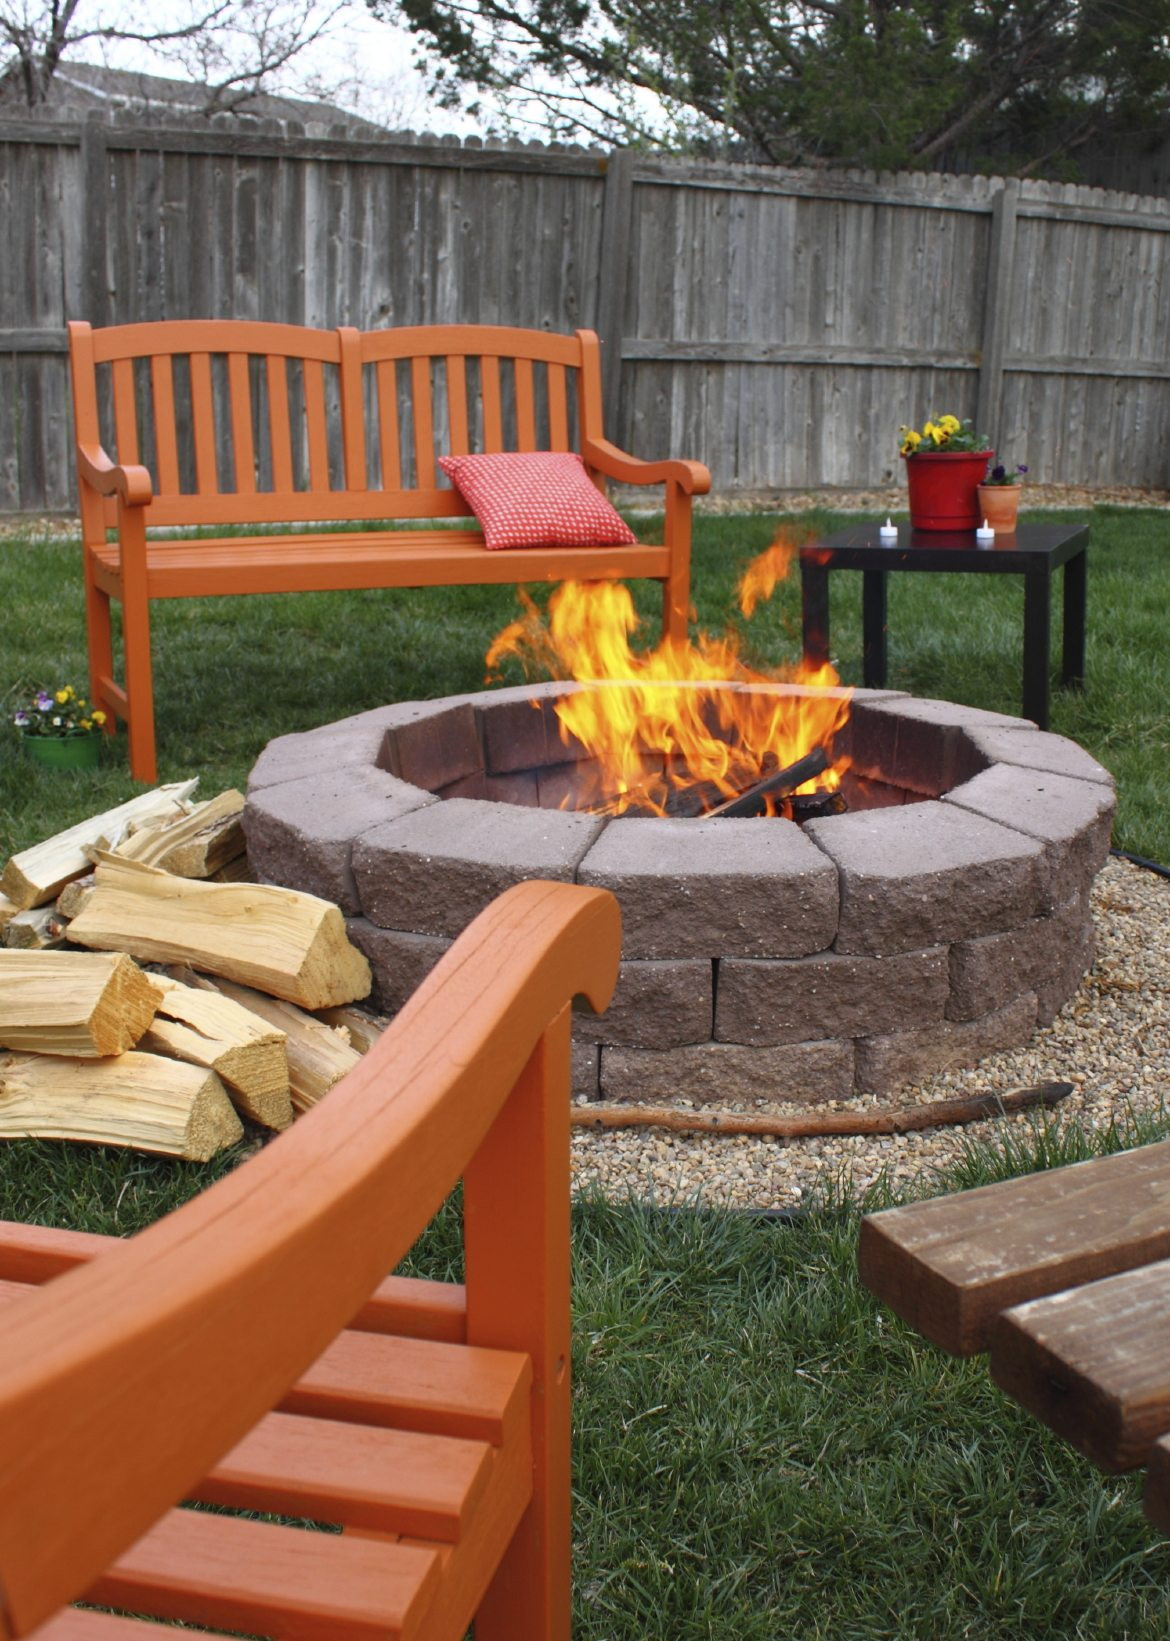 Outdoor Fire Pit Patio
 Using Fire Pits In Gardens – Tips Building A Backyard